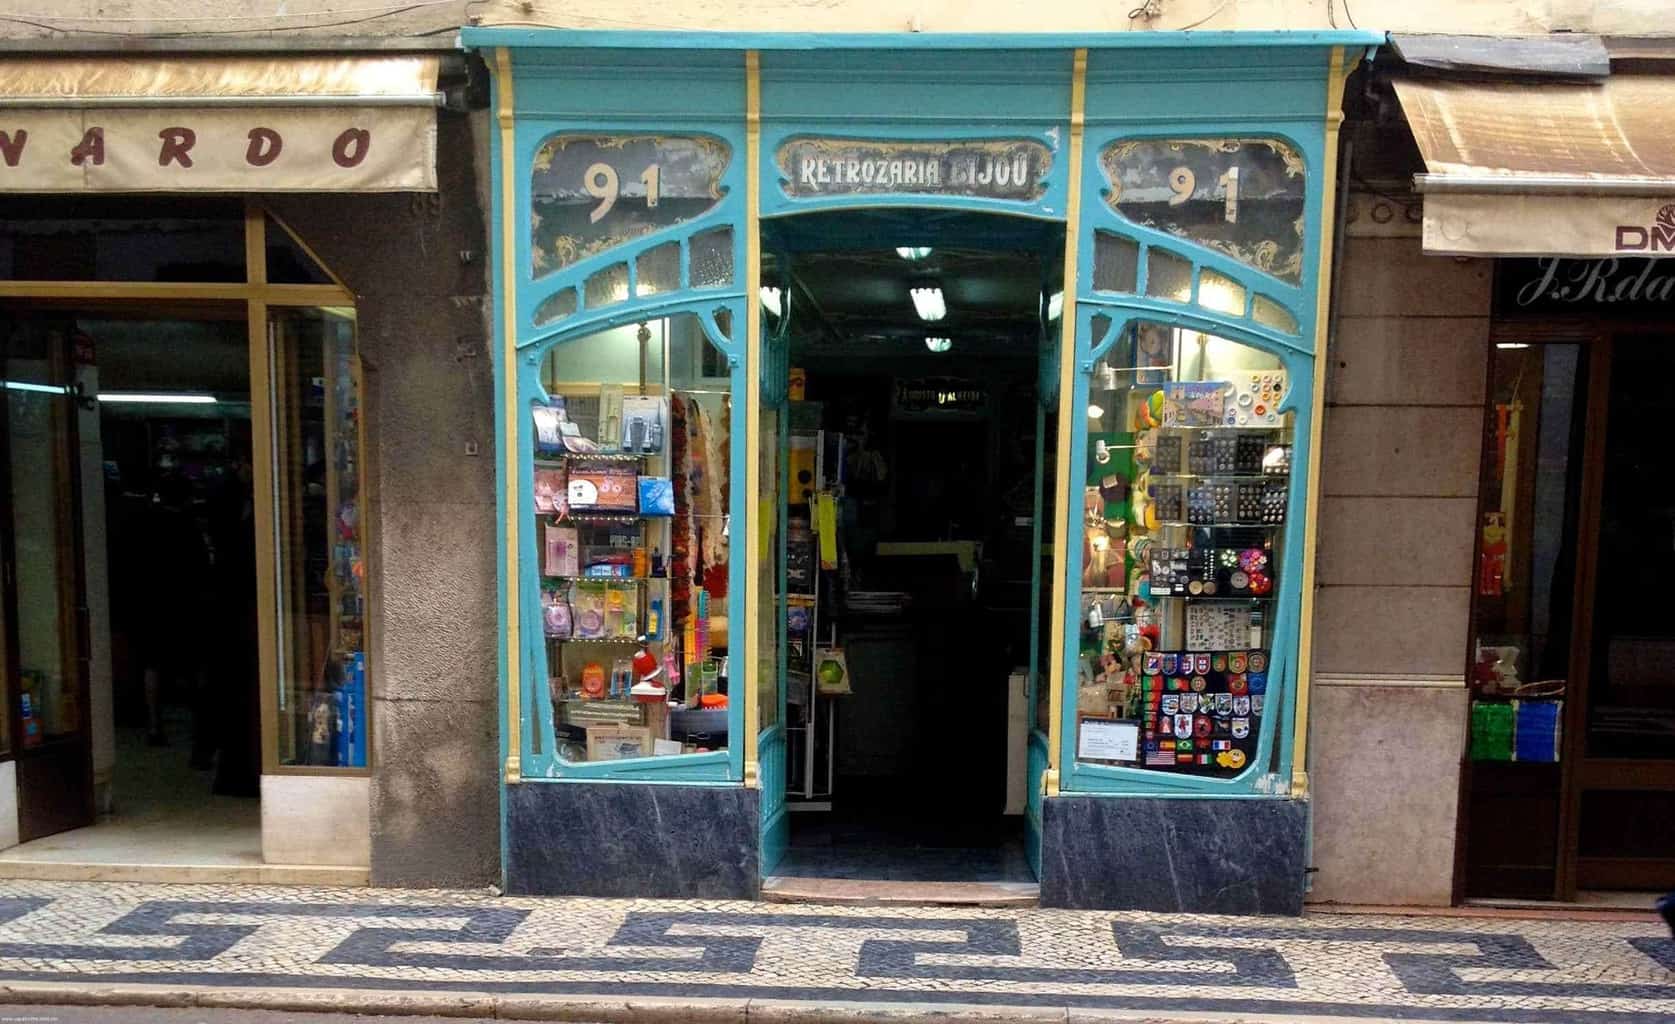 Shops offering a variety of very cool antiques and designer wares. This is where to shop in Lisbon Portugal. One Day In Lisbon - Plan Your One Day Lisbon Itinerary